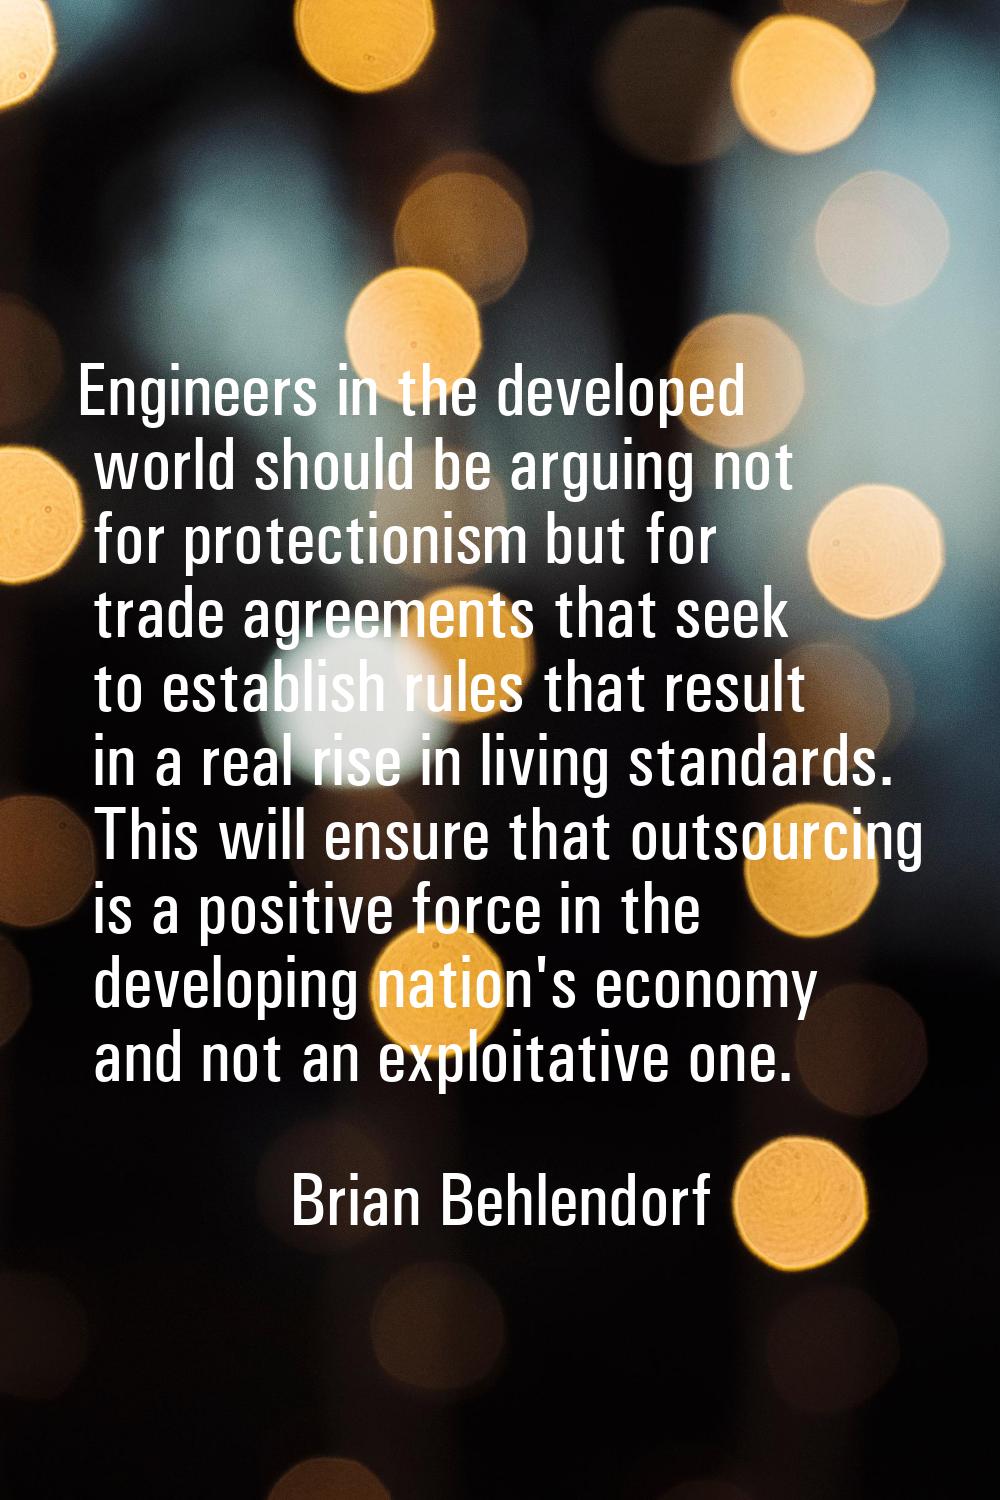 Engineers in the developed world should be arguing not for protectionism but for trade agreements t